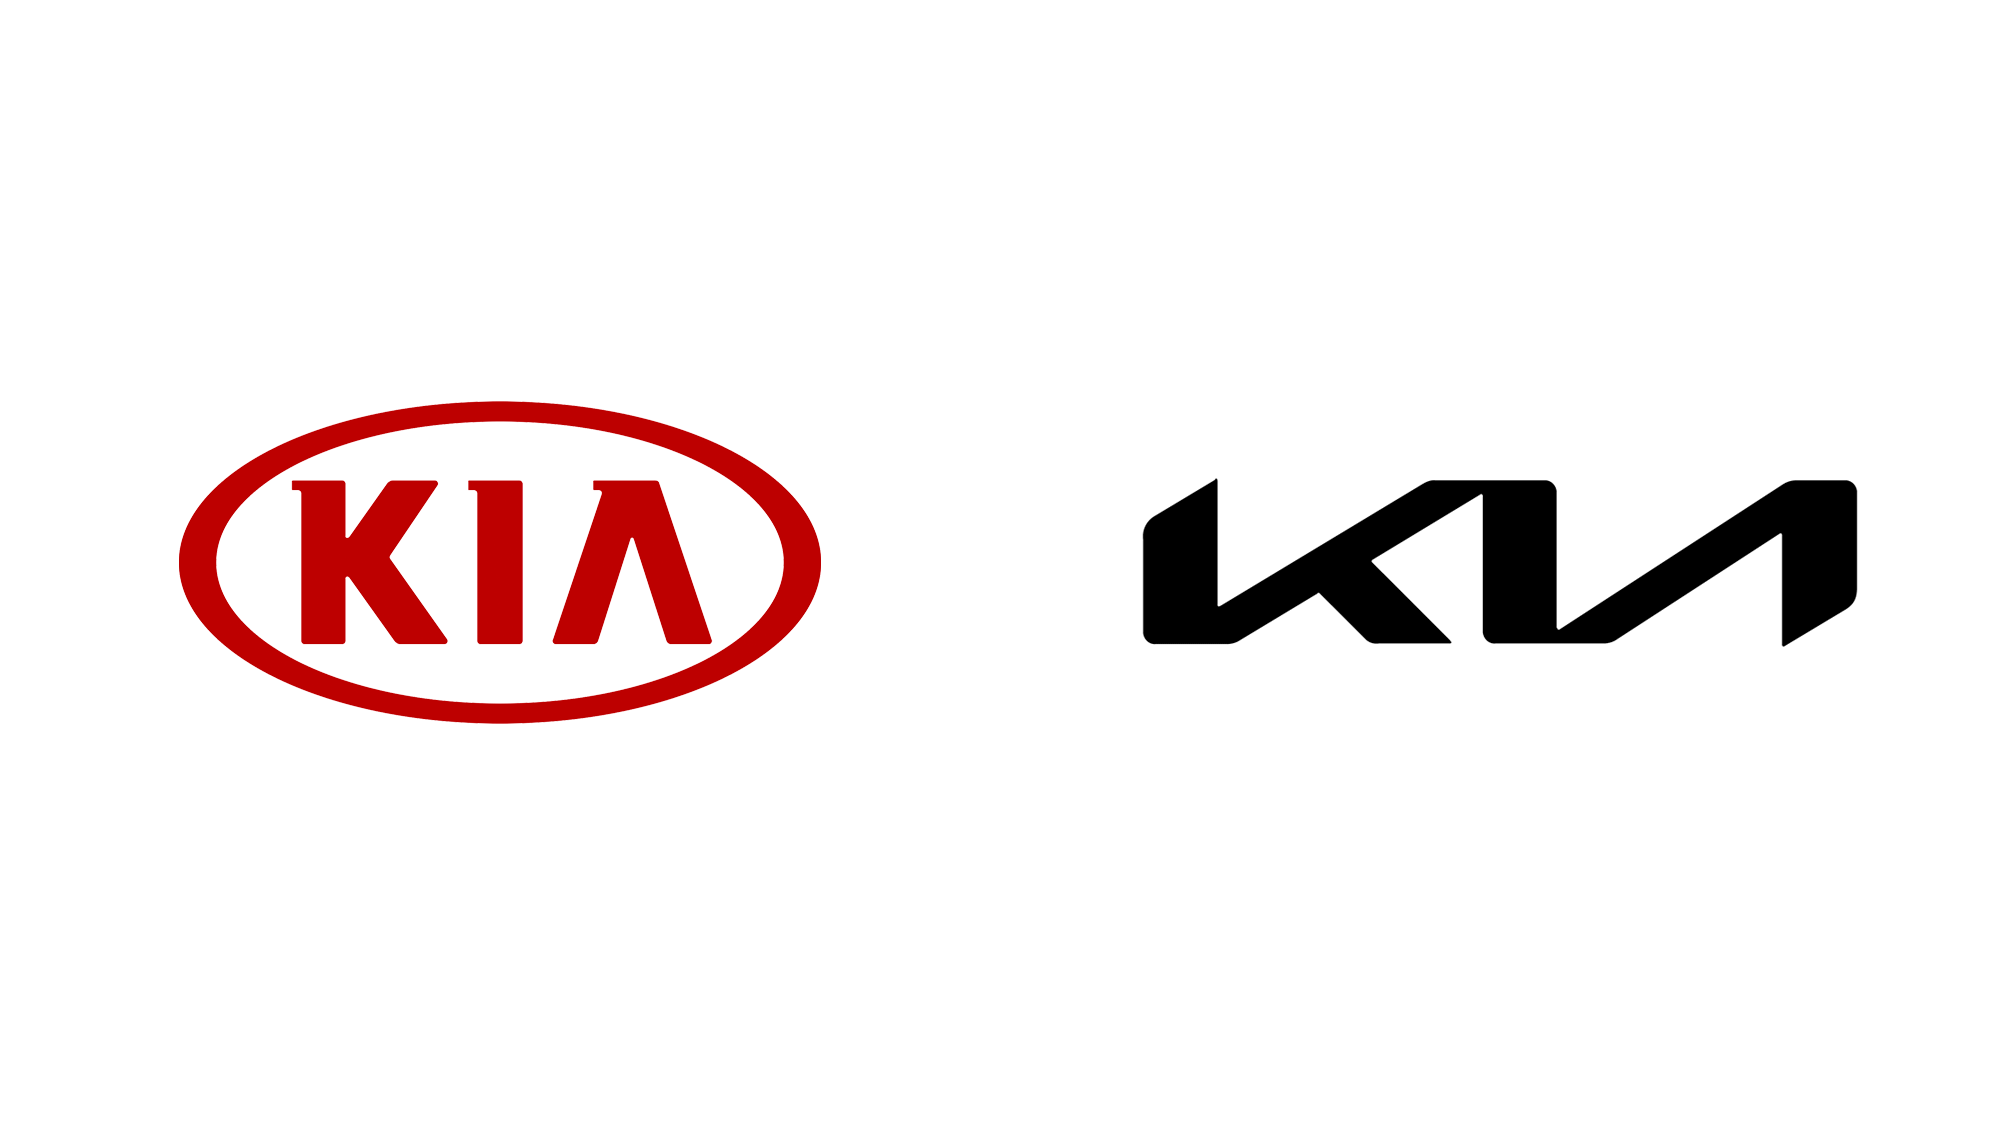 kia_logo_before_after.png